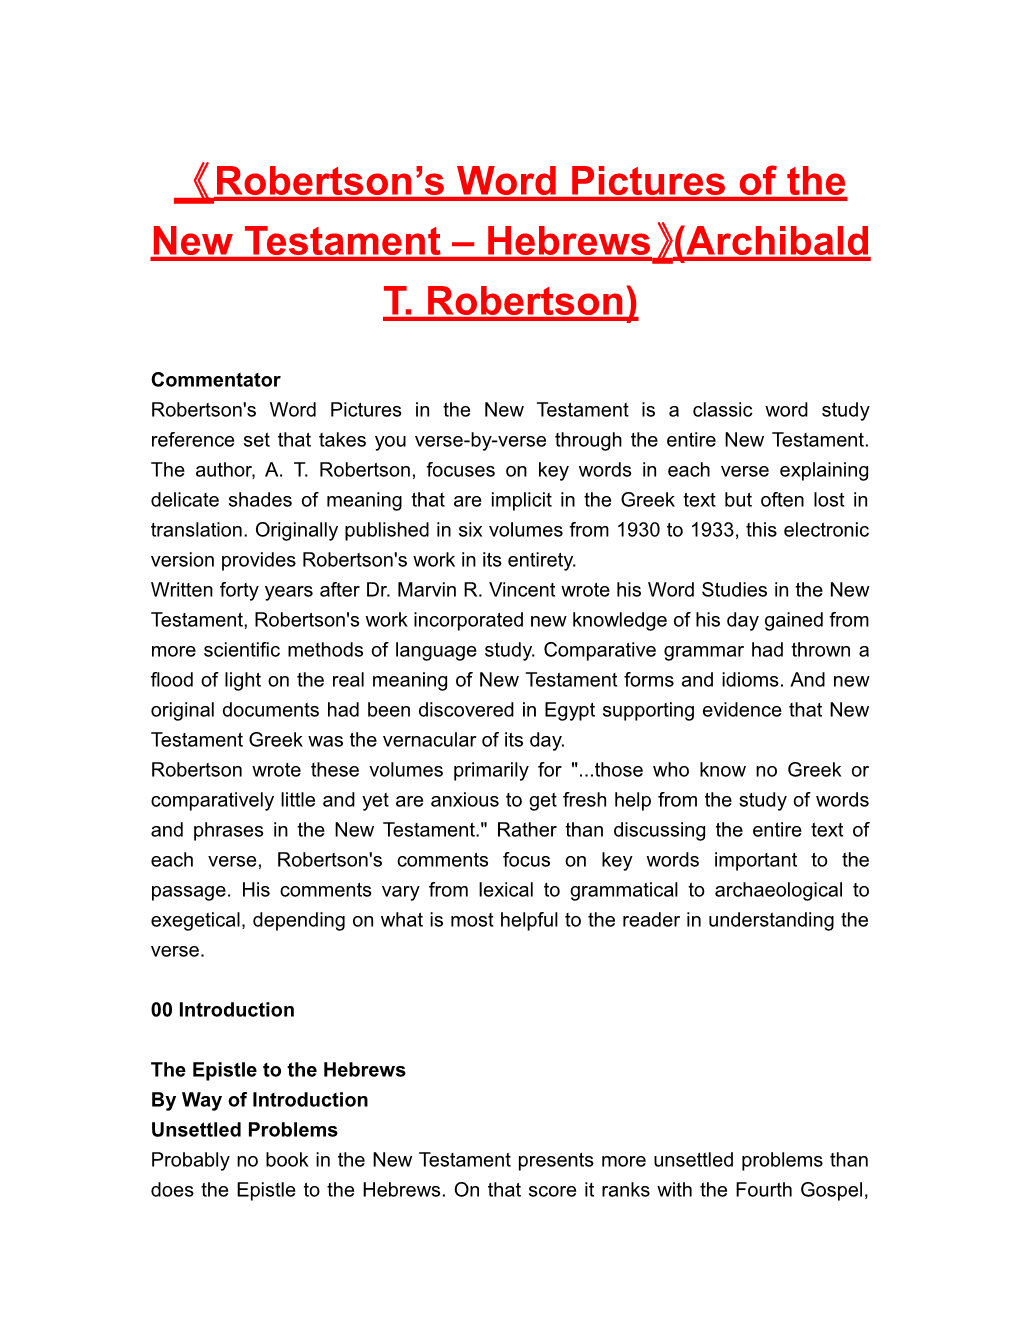 Robertson S Word Pictures of the New Testament Hebrews (Archibald T. Robertson)